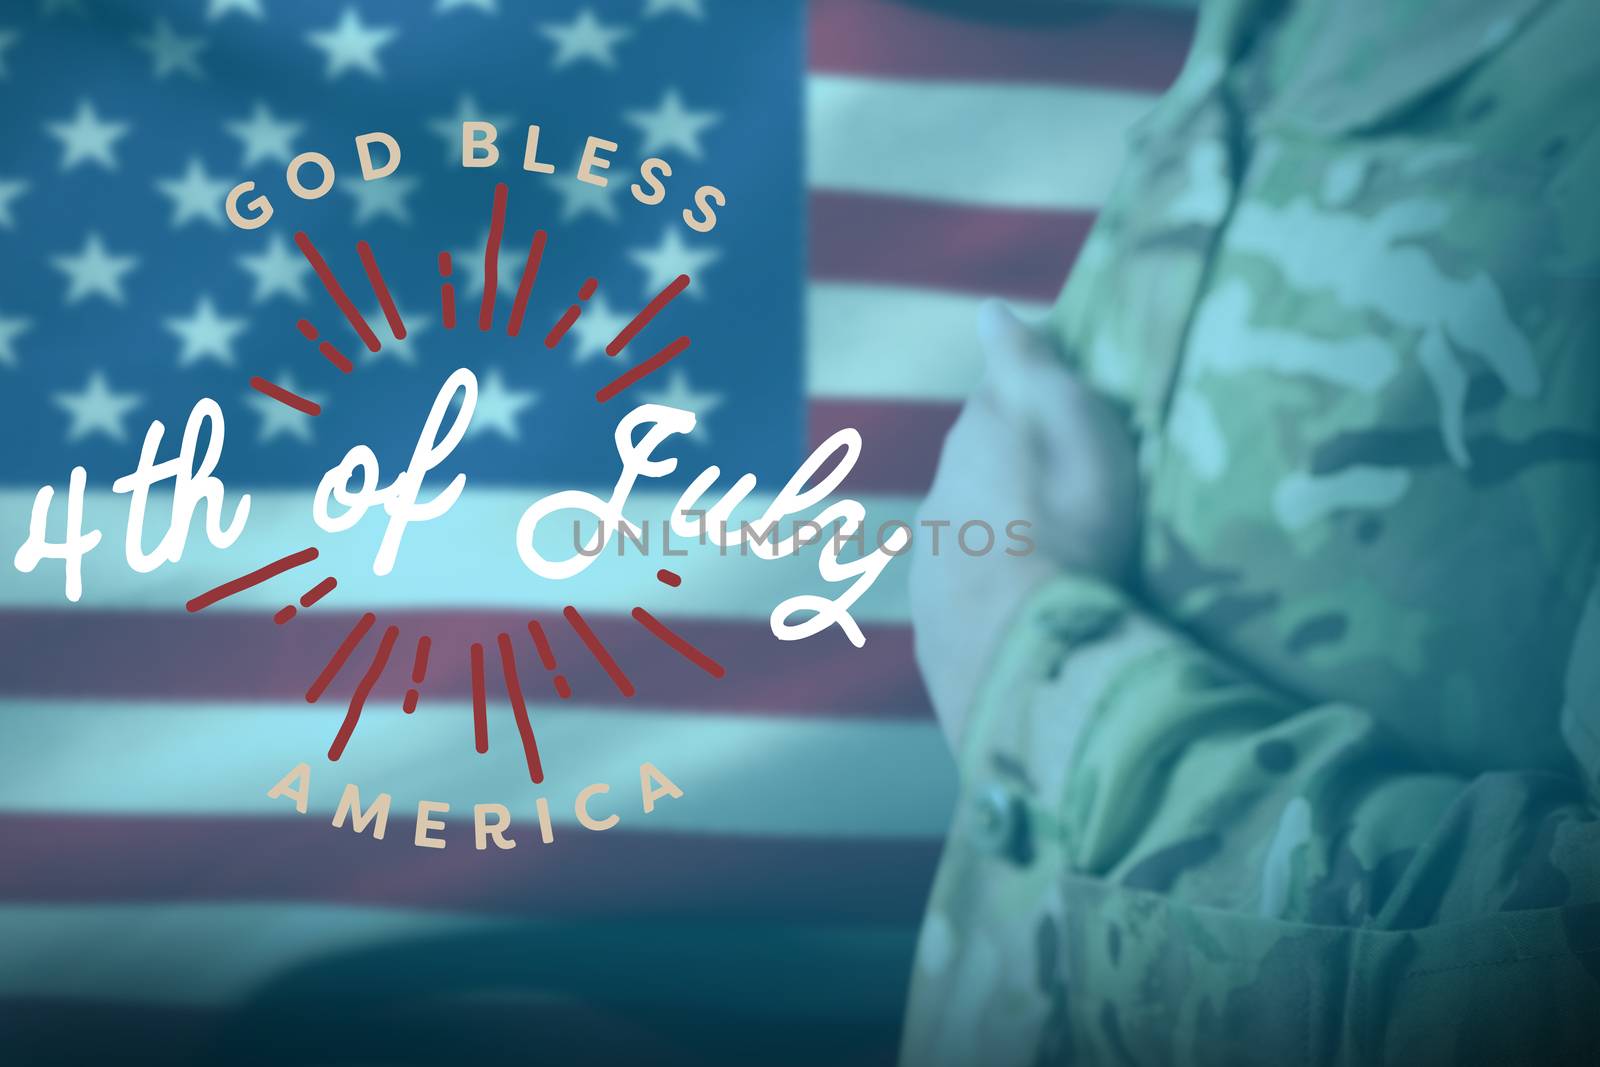 Mid section of military soldier taking oath against digitally generated image of happy 4th of july message